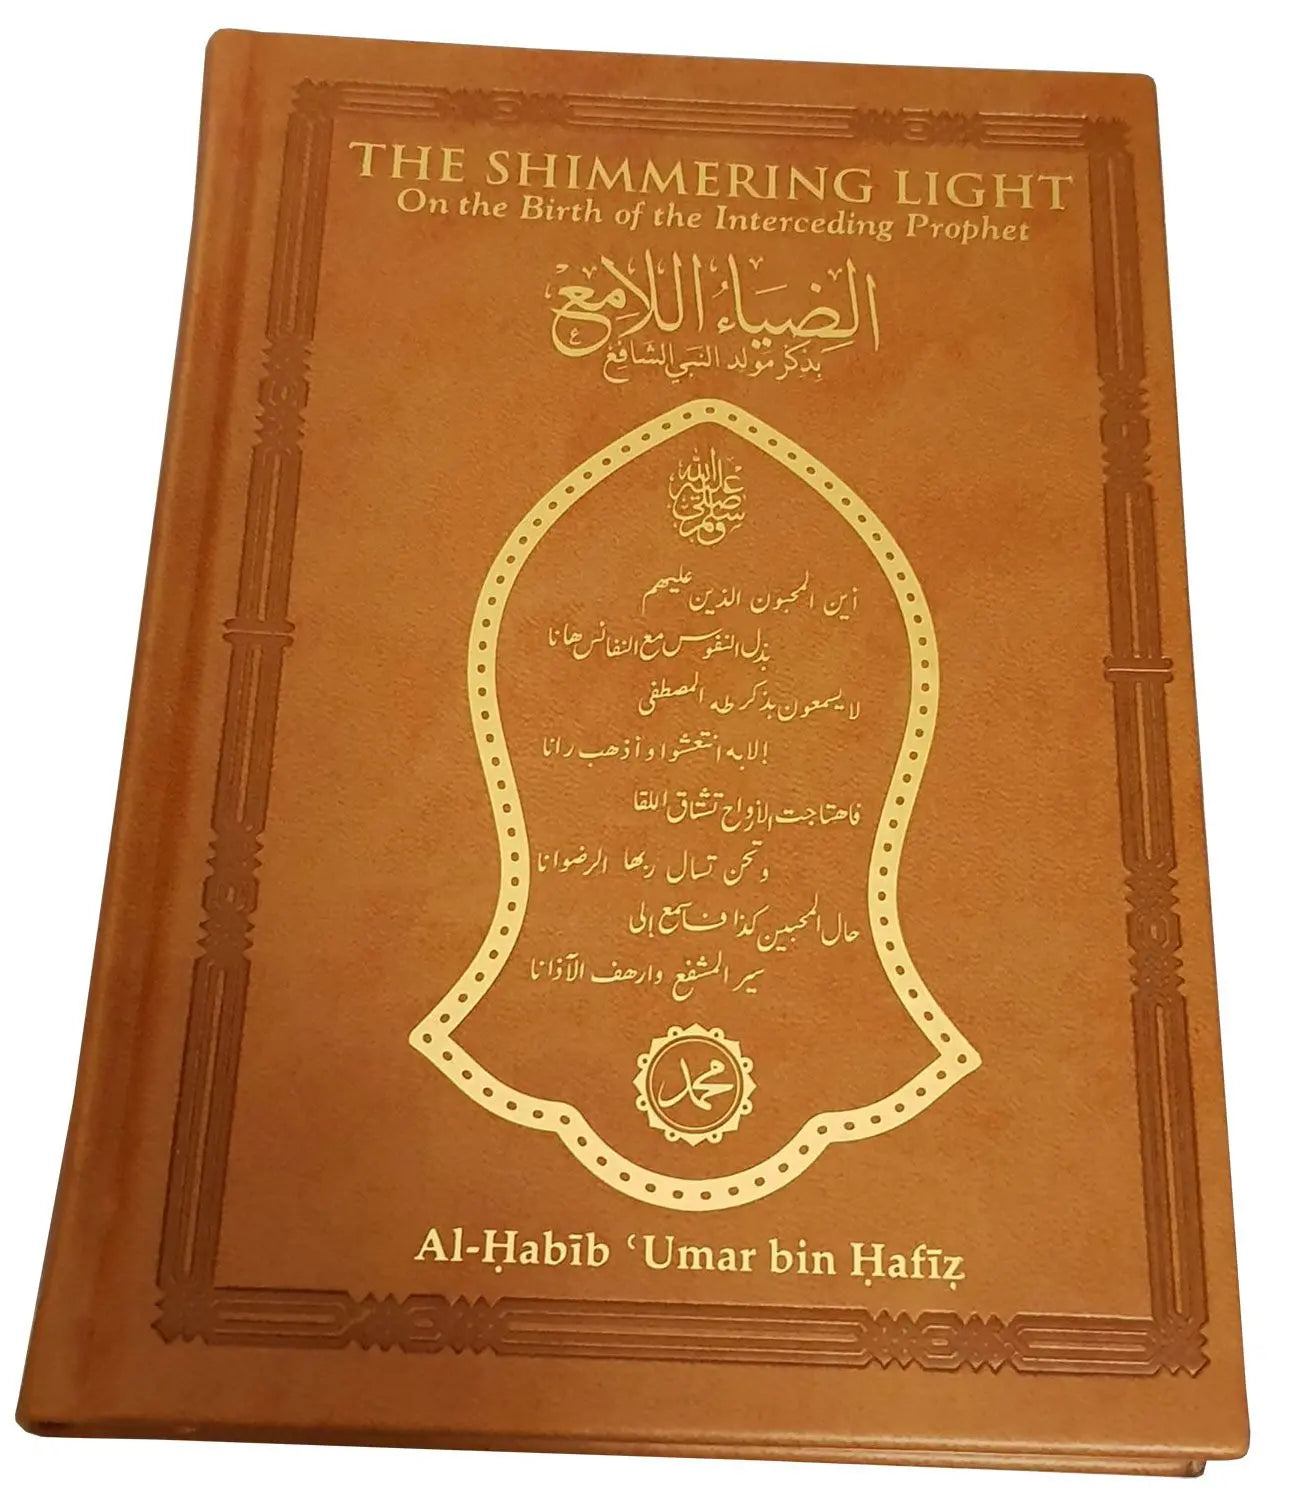 The Shimmering Light: On the Birth of the Interceding Prophet (HB)